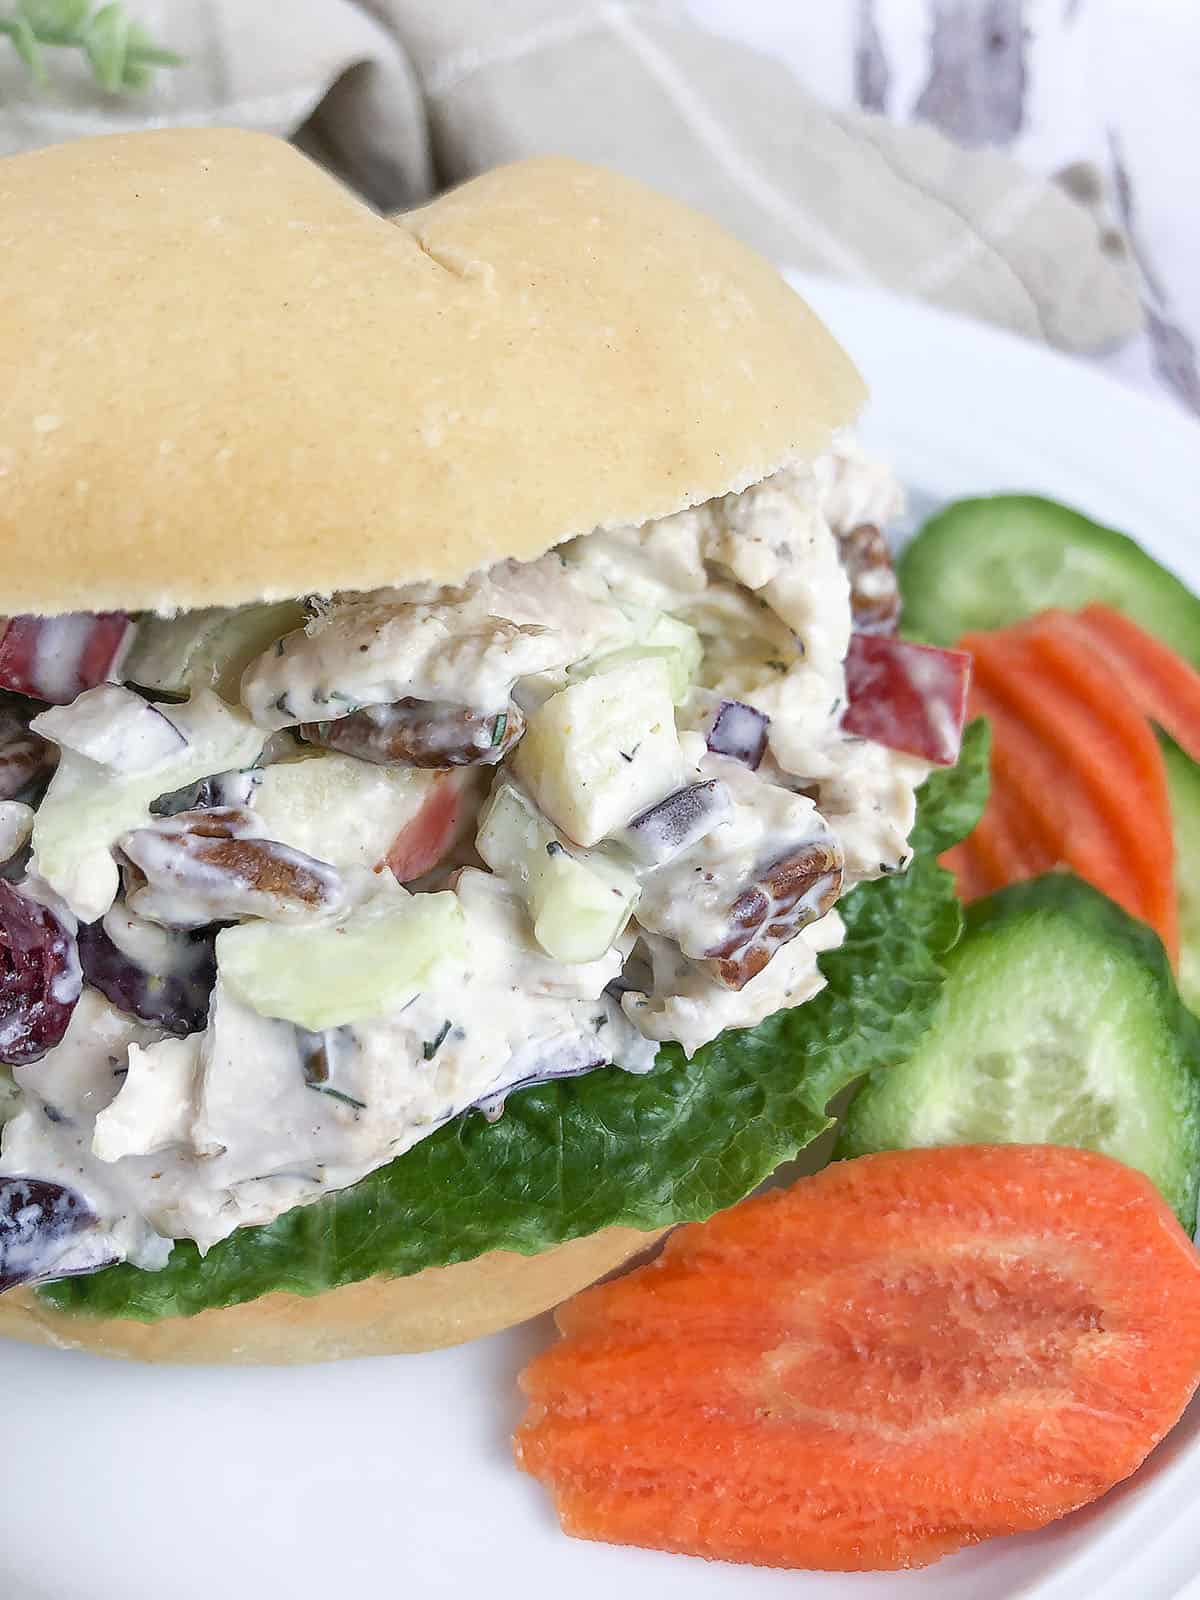 Chicken salad on a bun with vegetables.